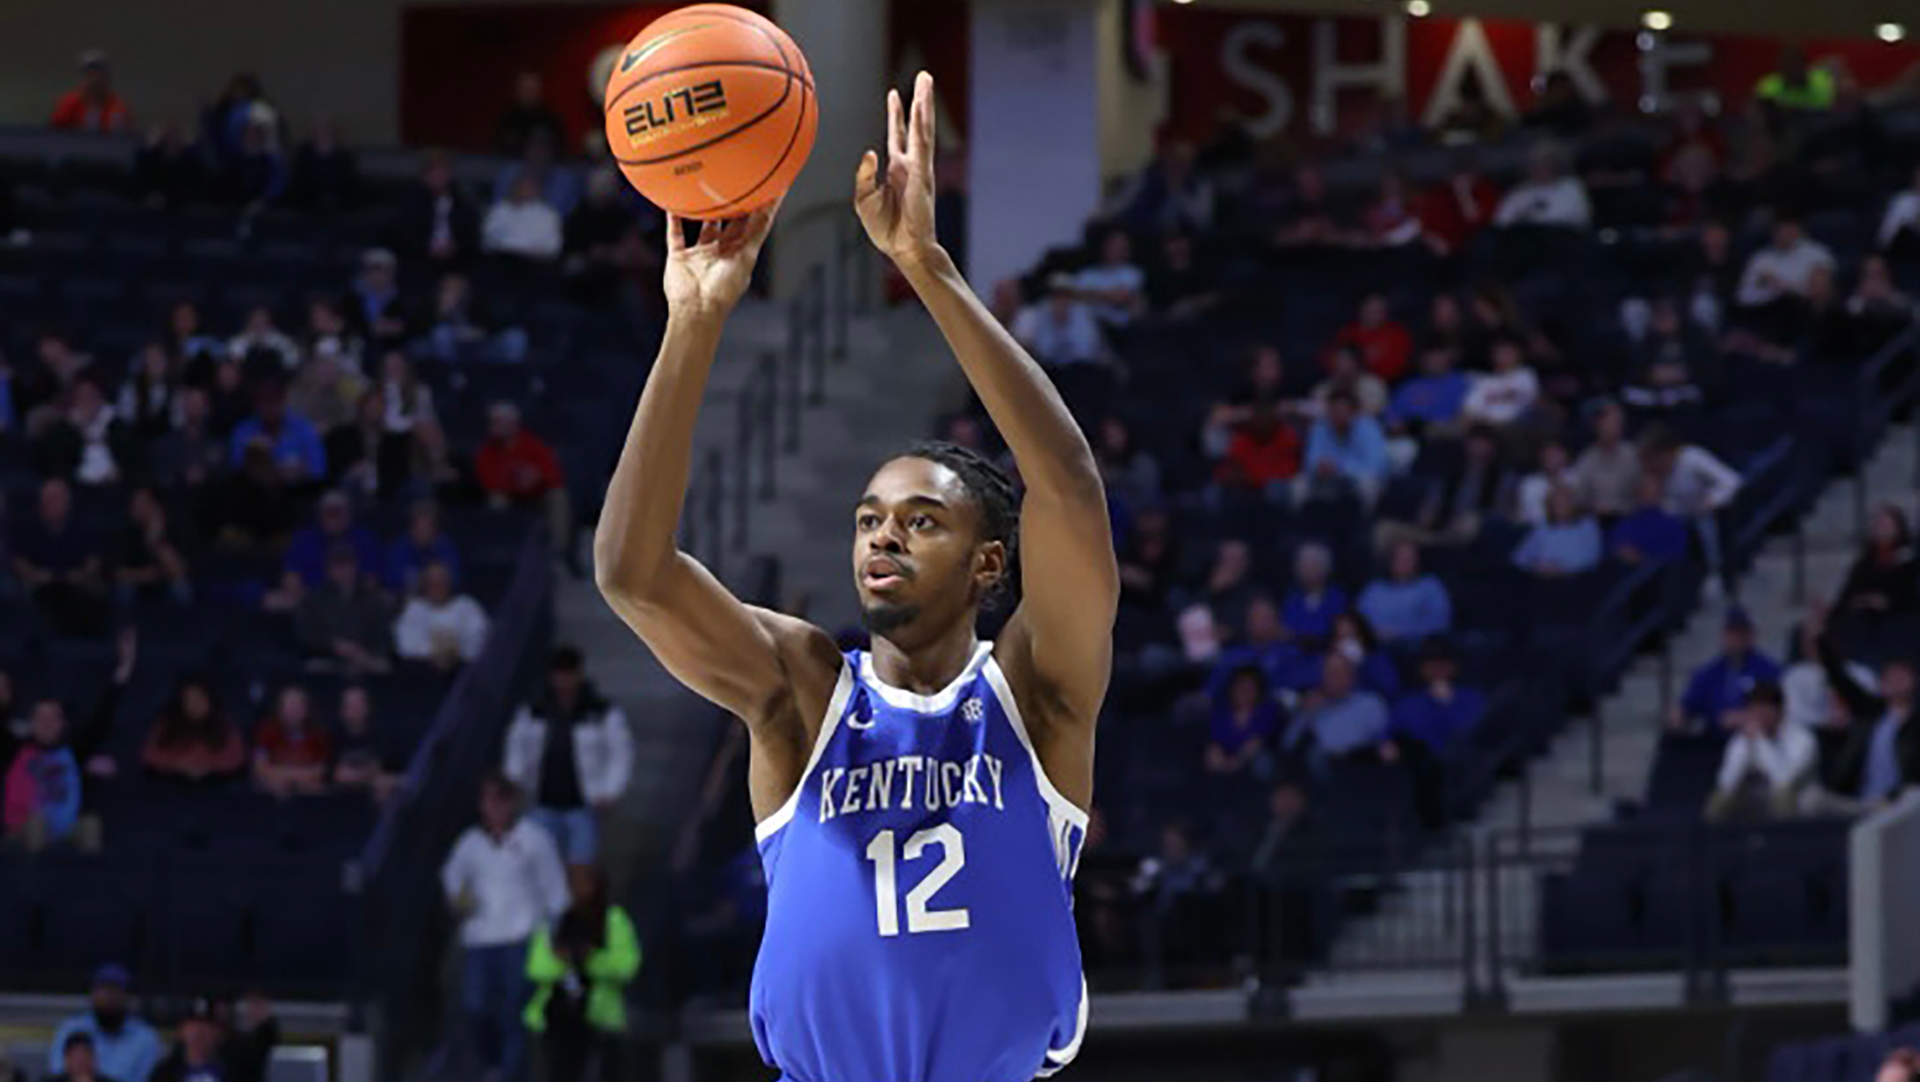 Reeves Leads Kentucky Past Ole Miss on Tuesday